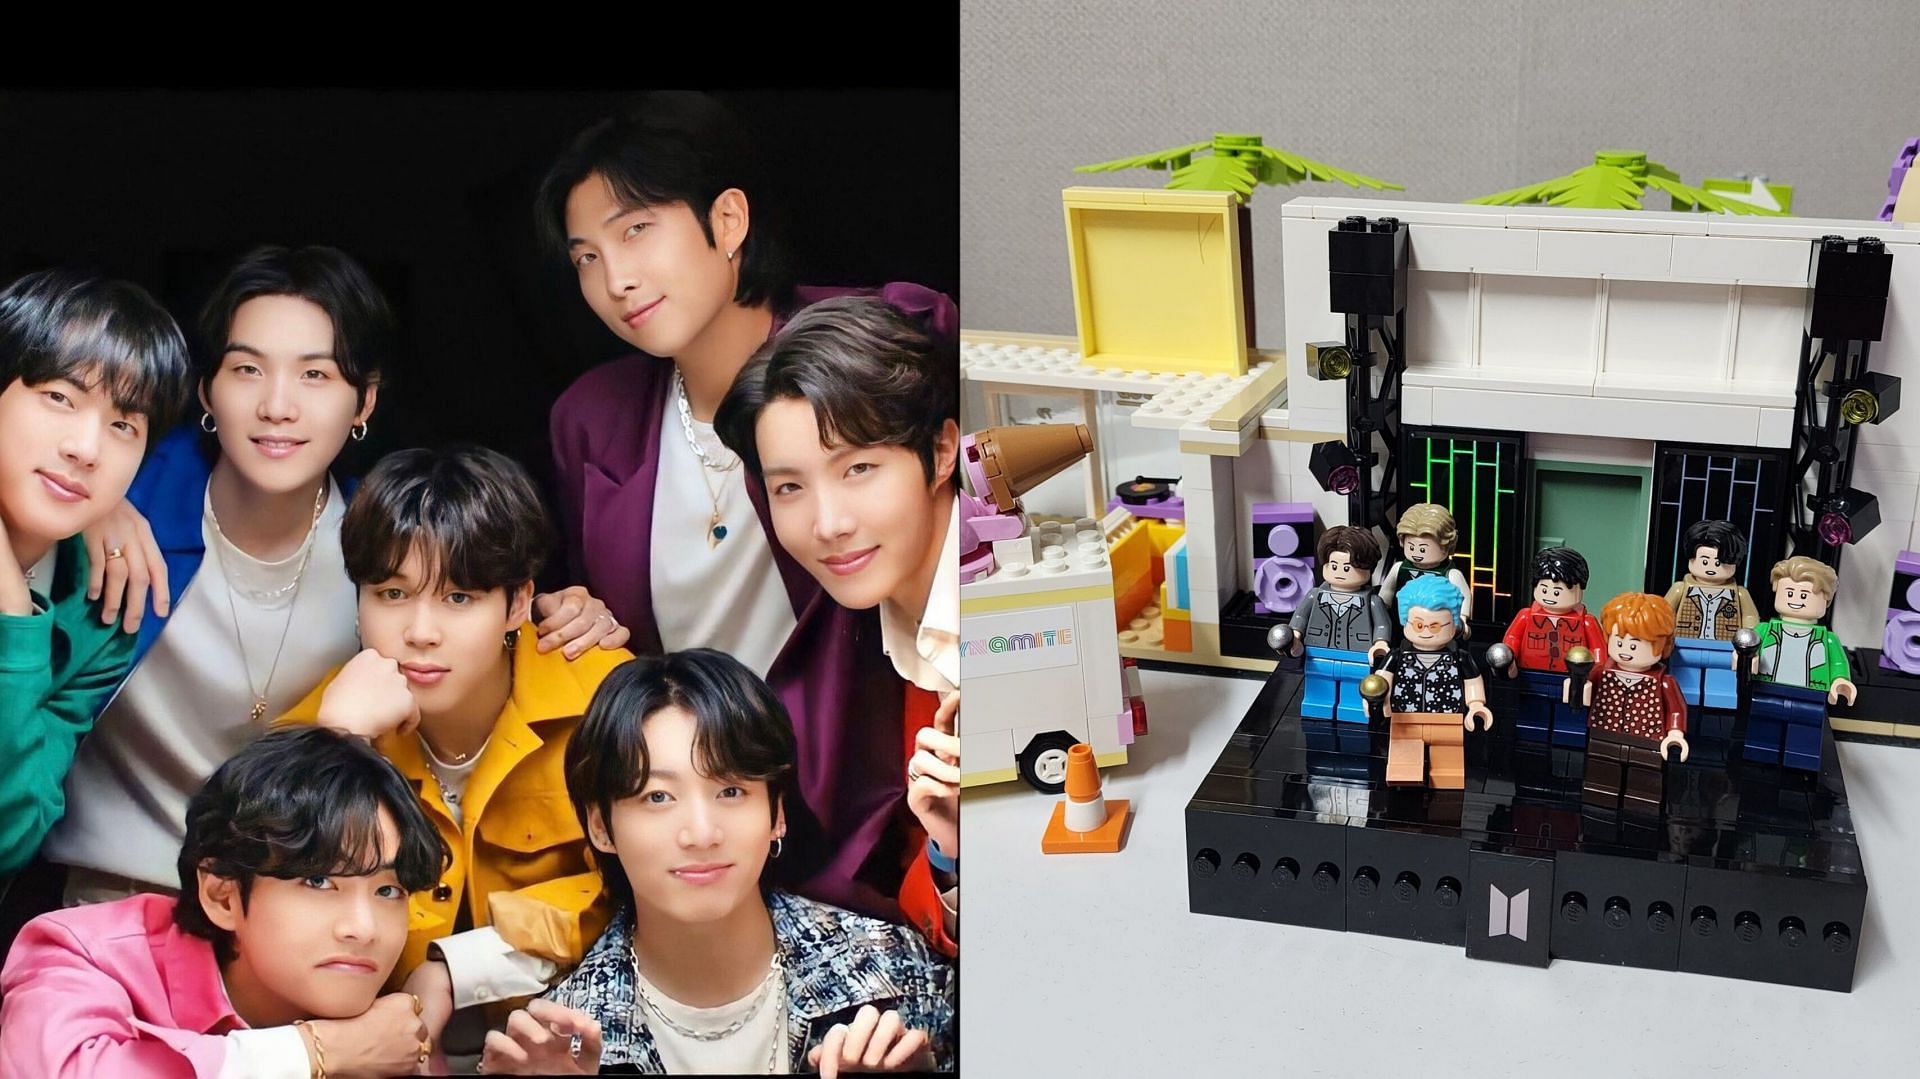 It's so cute”: BTS Dynamite Lego set sold out within minutes as